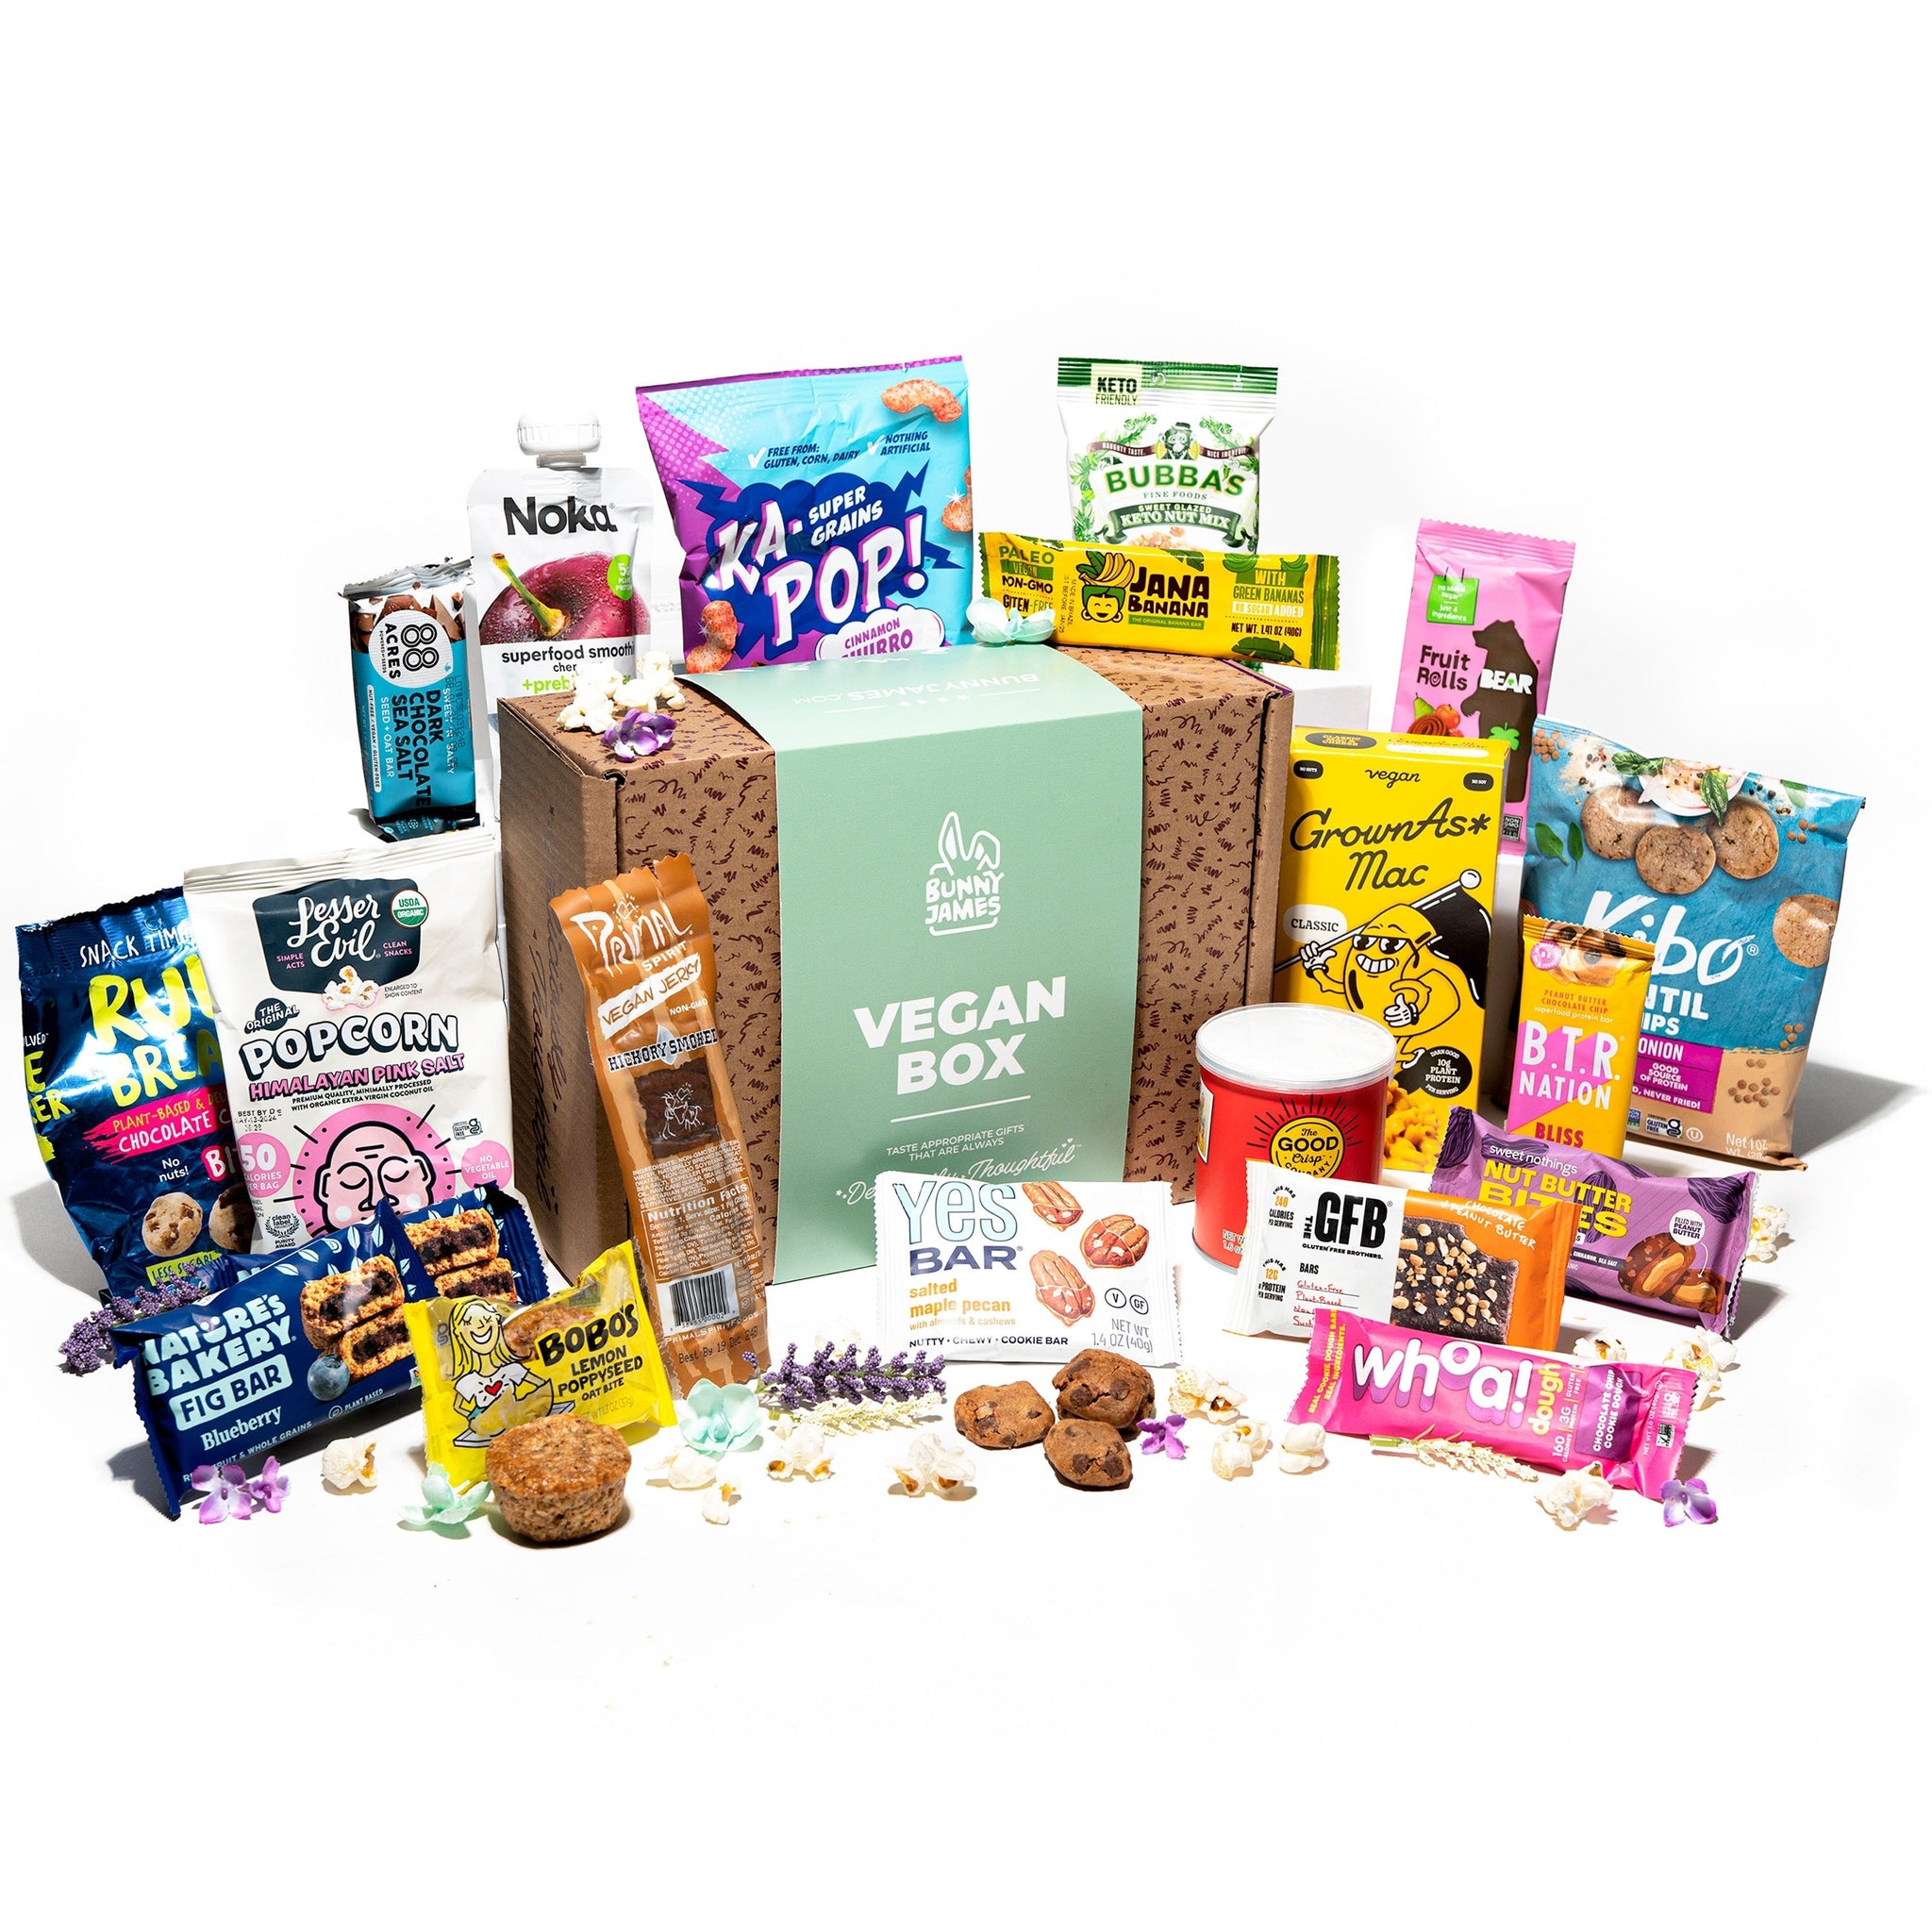 Plant-Powered Dad: Vegan Snack Box for Father's Day, Cookies, Bars, Chips, Jerky & More